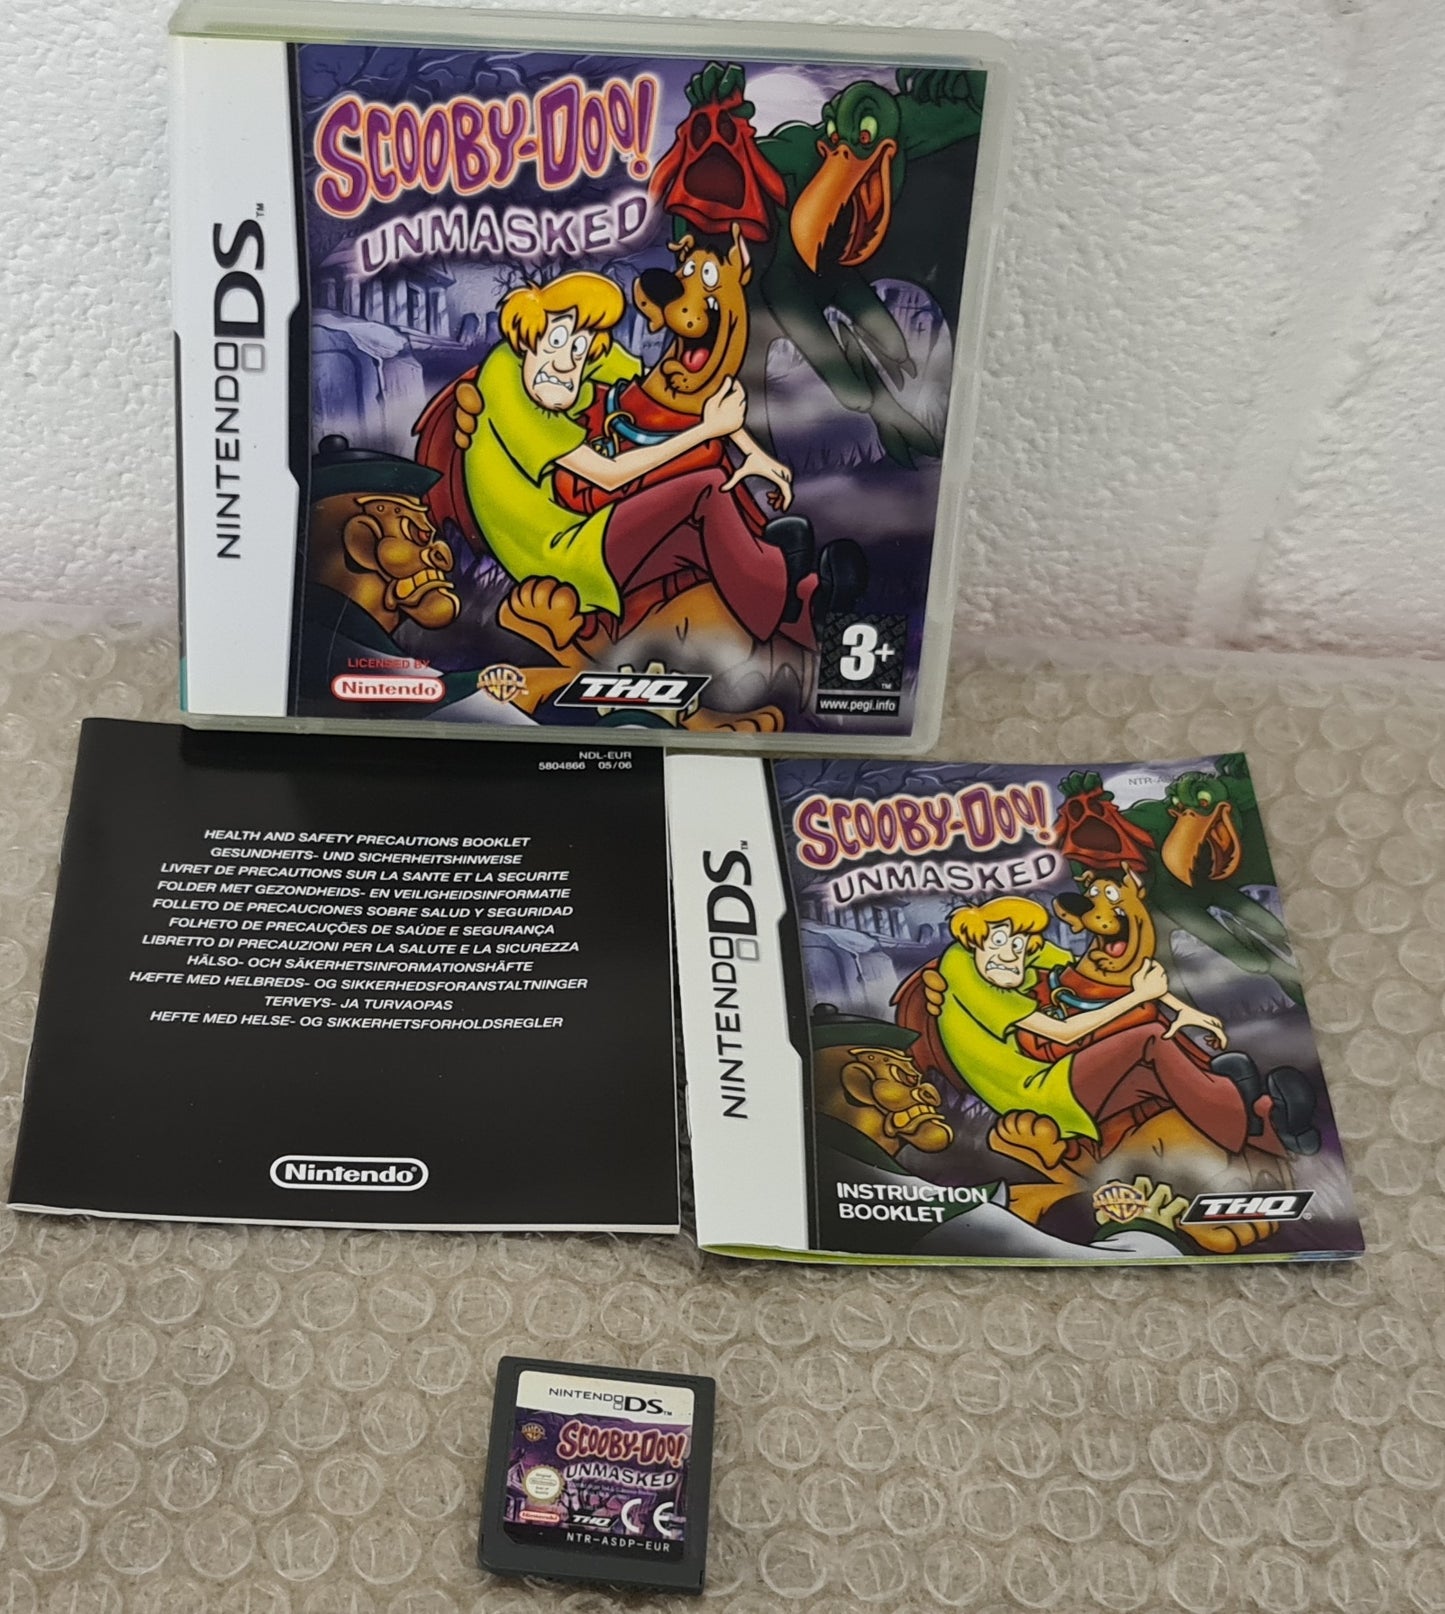 Scooby-Doo Unmasked Nintendo DS Game